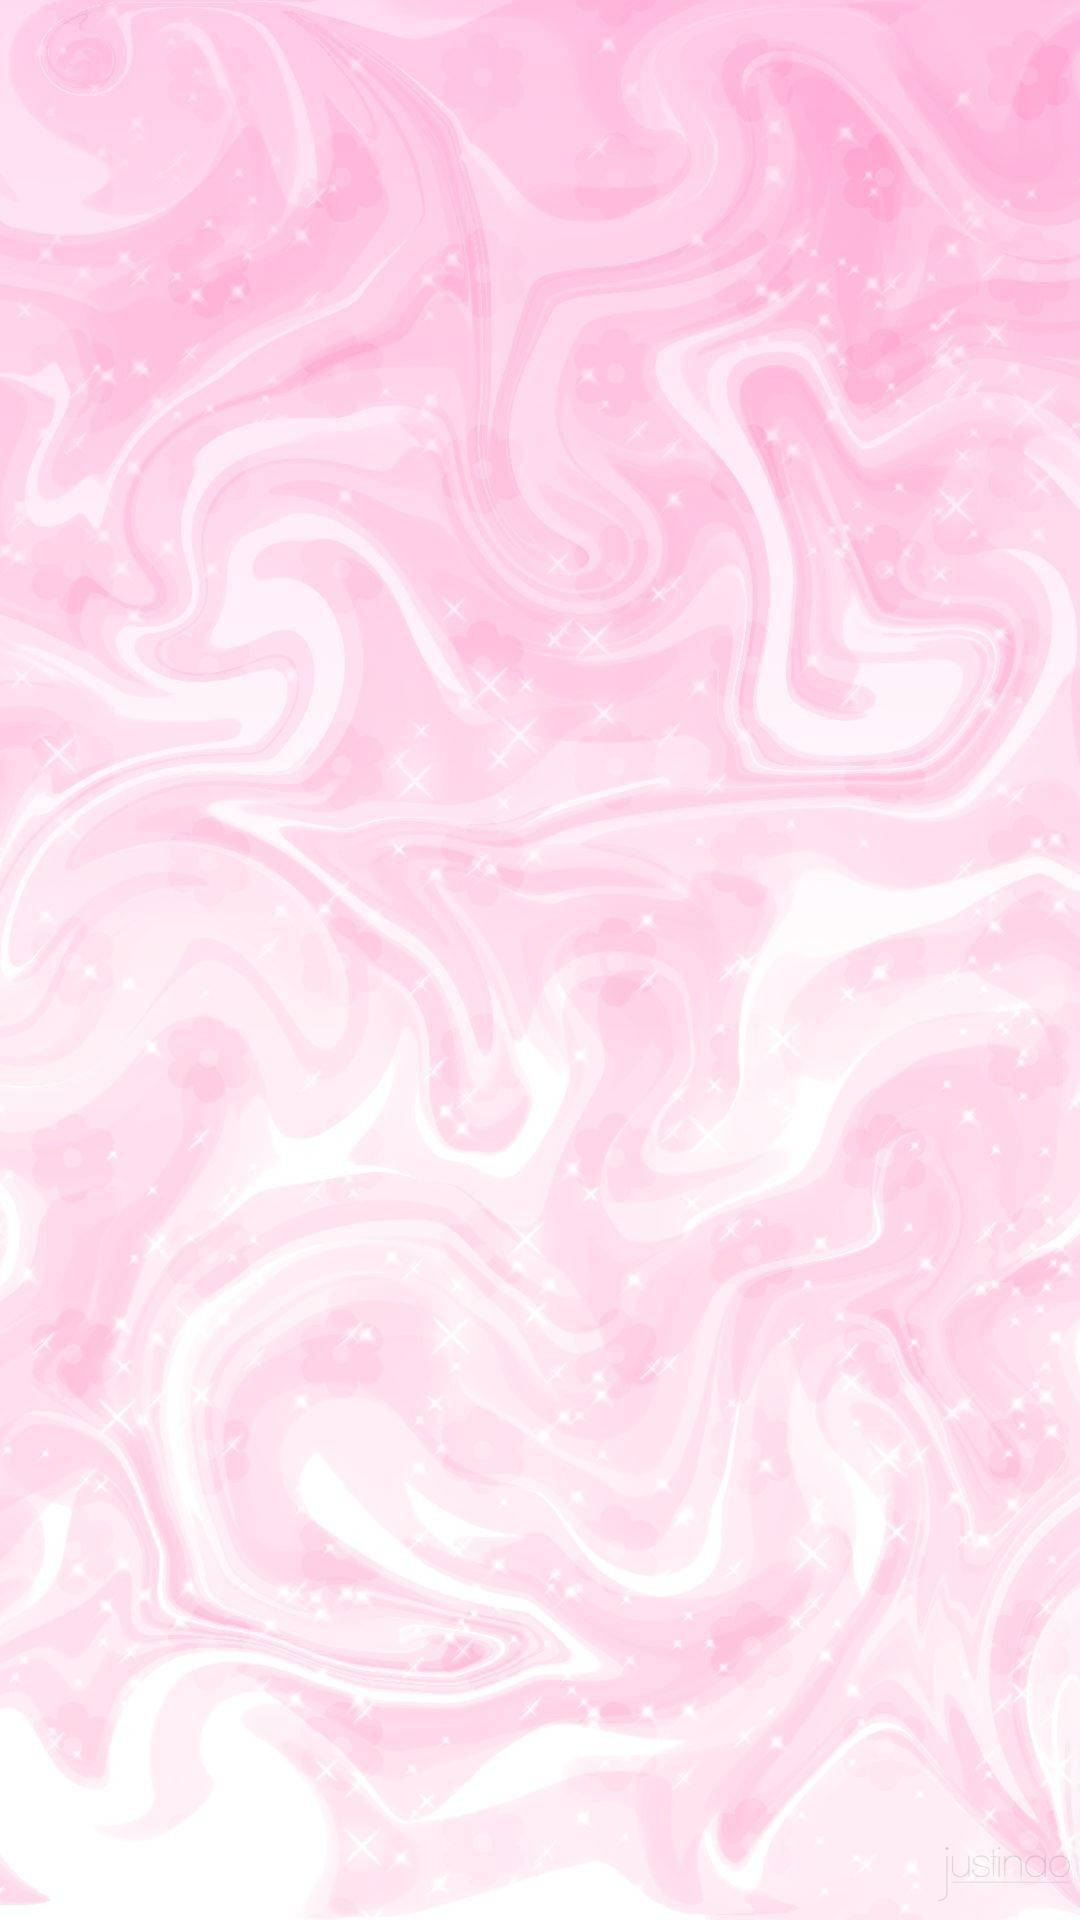 Luxurious Pink Marble Texture With Wavy Patterns Background